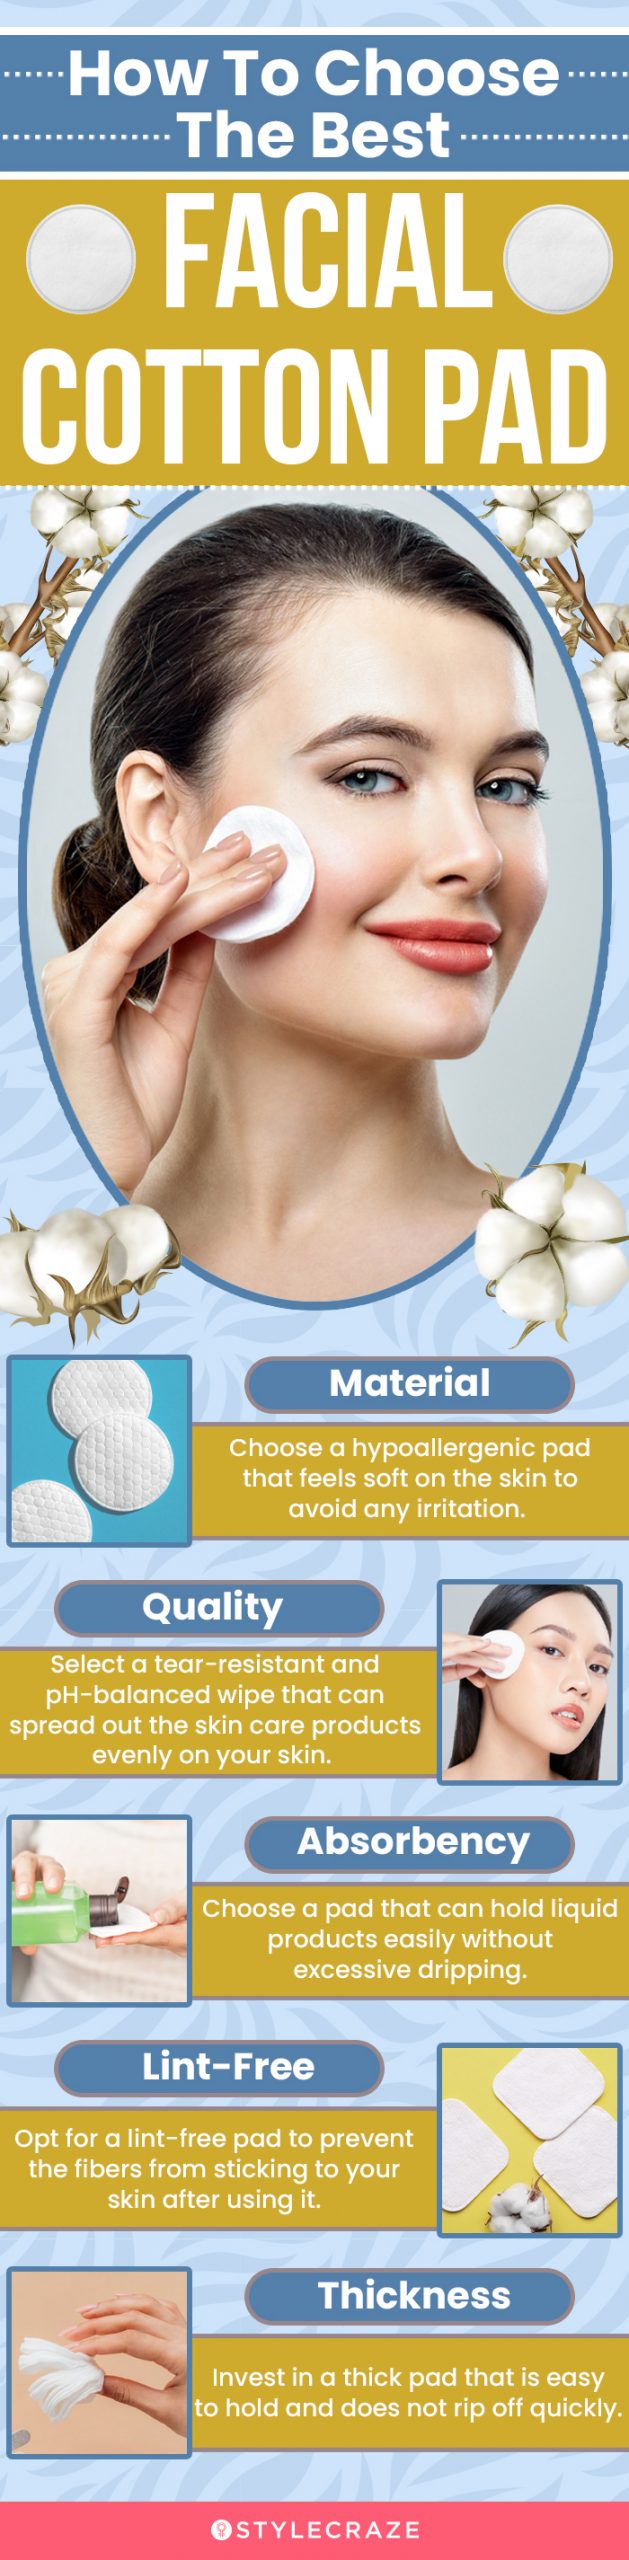 How To Choose The Best Facial Cotton Pad (infographic)